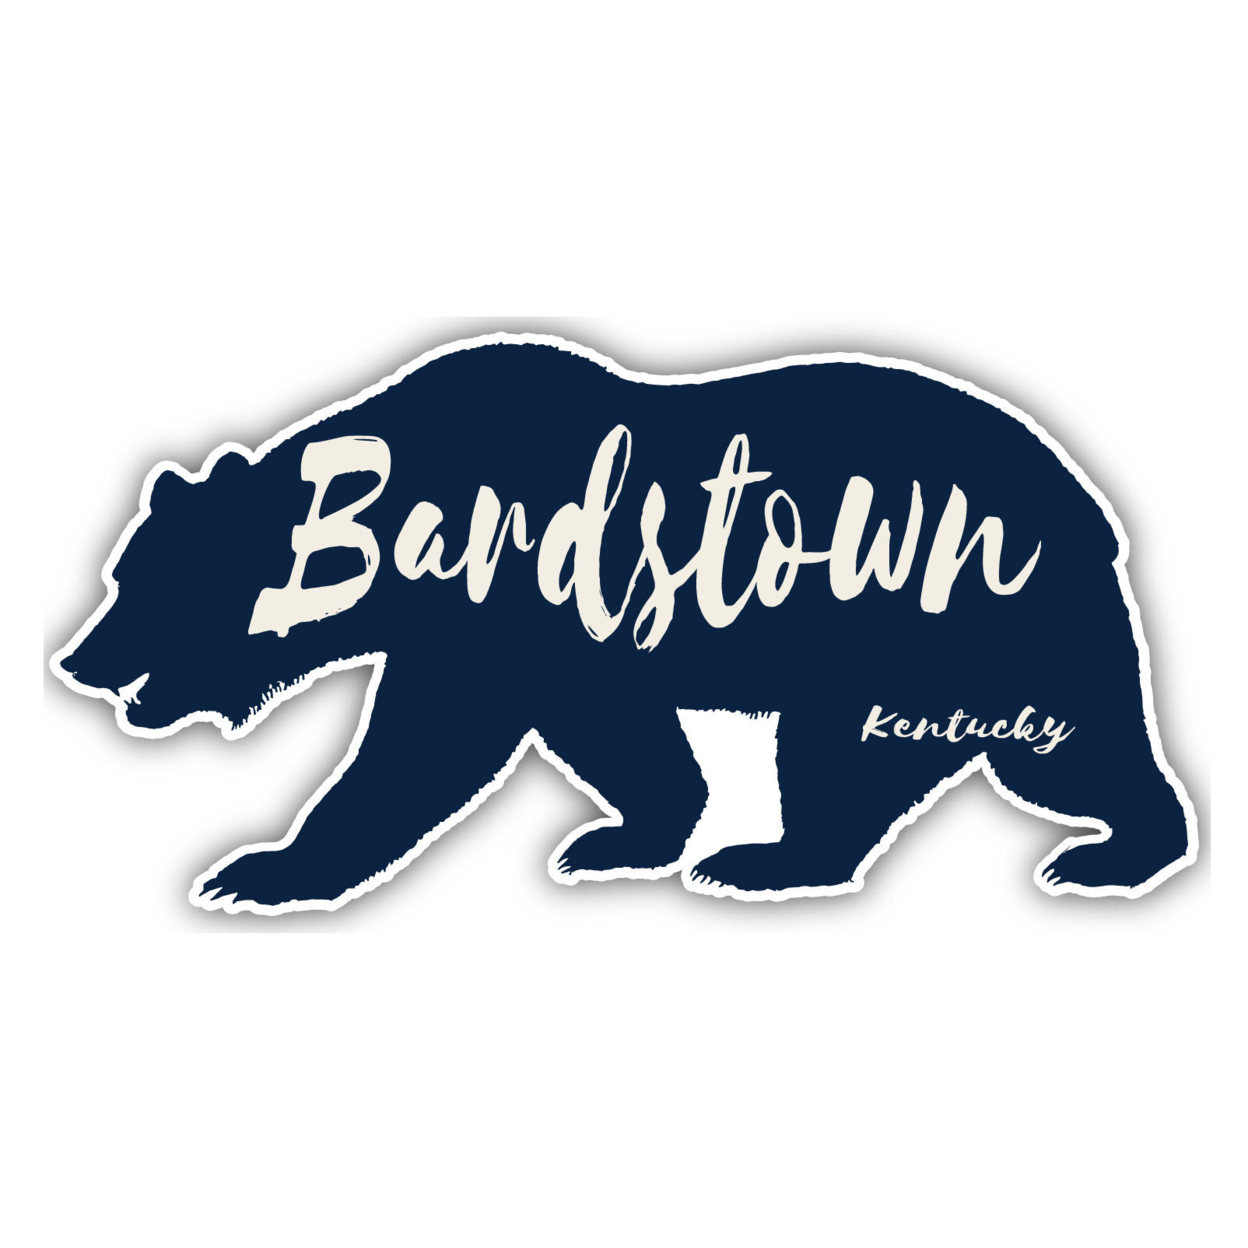 Bardstown Kentucky Souvenir Decorative Stickers (Choose Theme And Size) - 4-Pack, 8-Inch, Bear